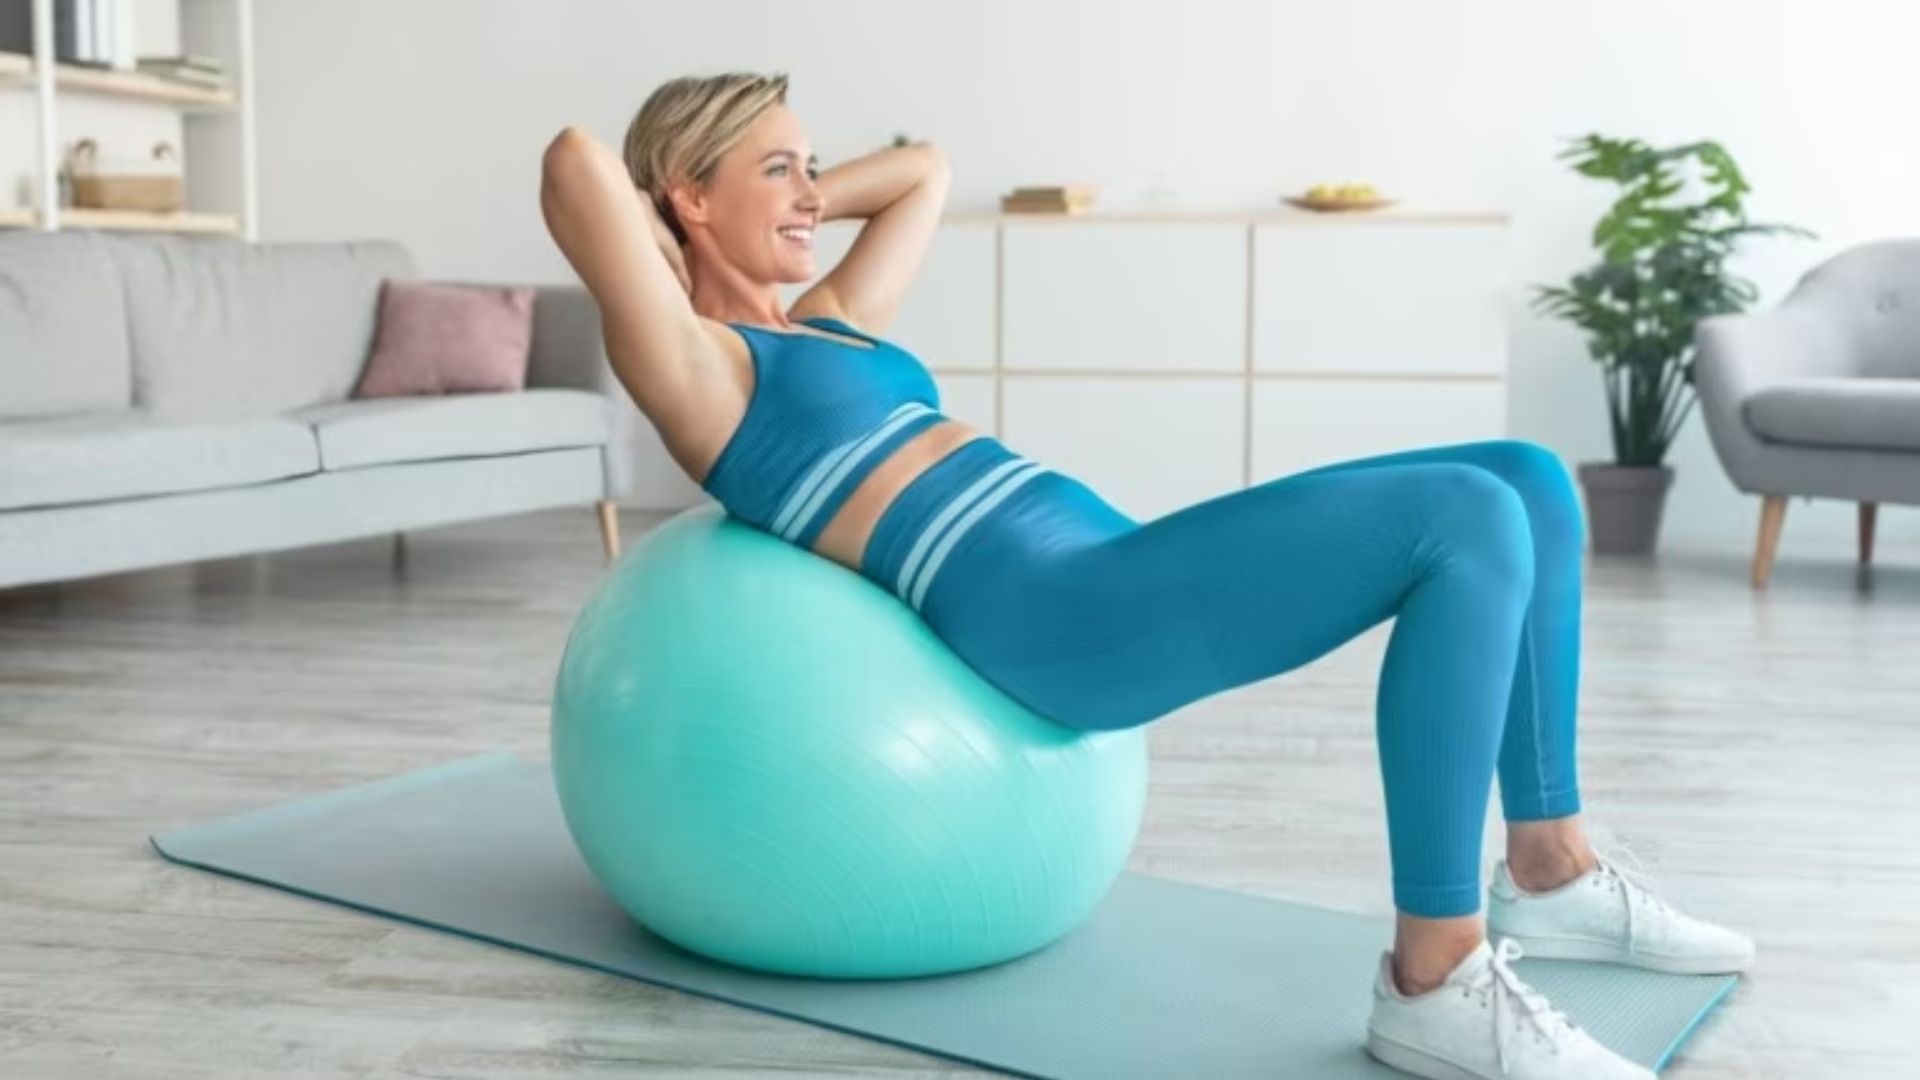 5 best exercise balls to increase spine and core strength